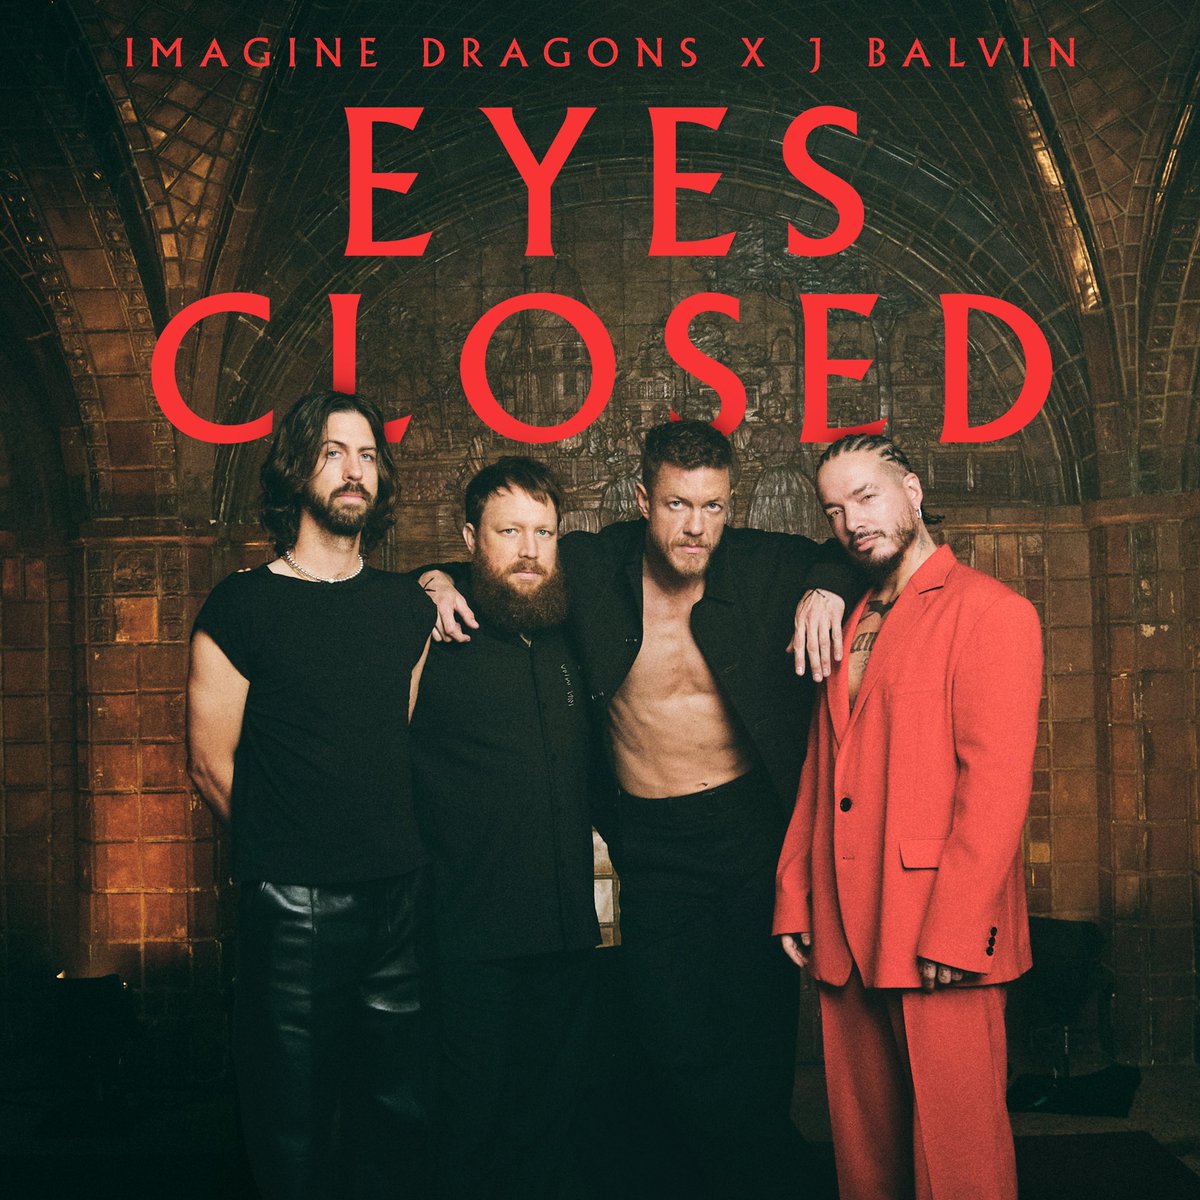 Eyes Closed with @JBALVIN out this Friday 🖤 @Imaginedragons imaginedragons.lnk.to/ECBalvin